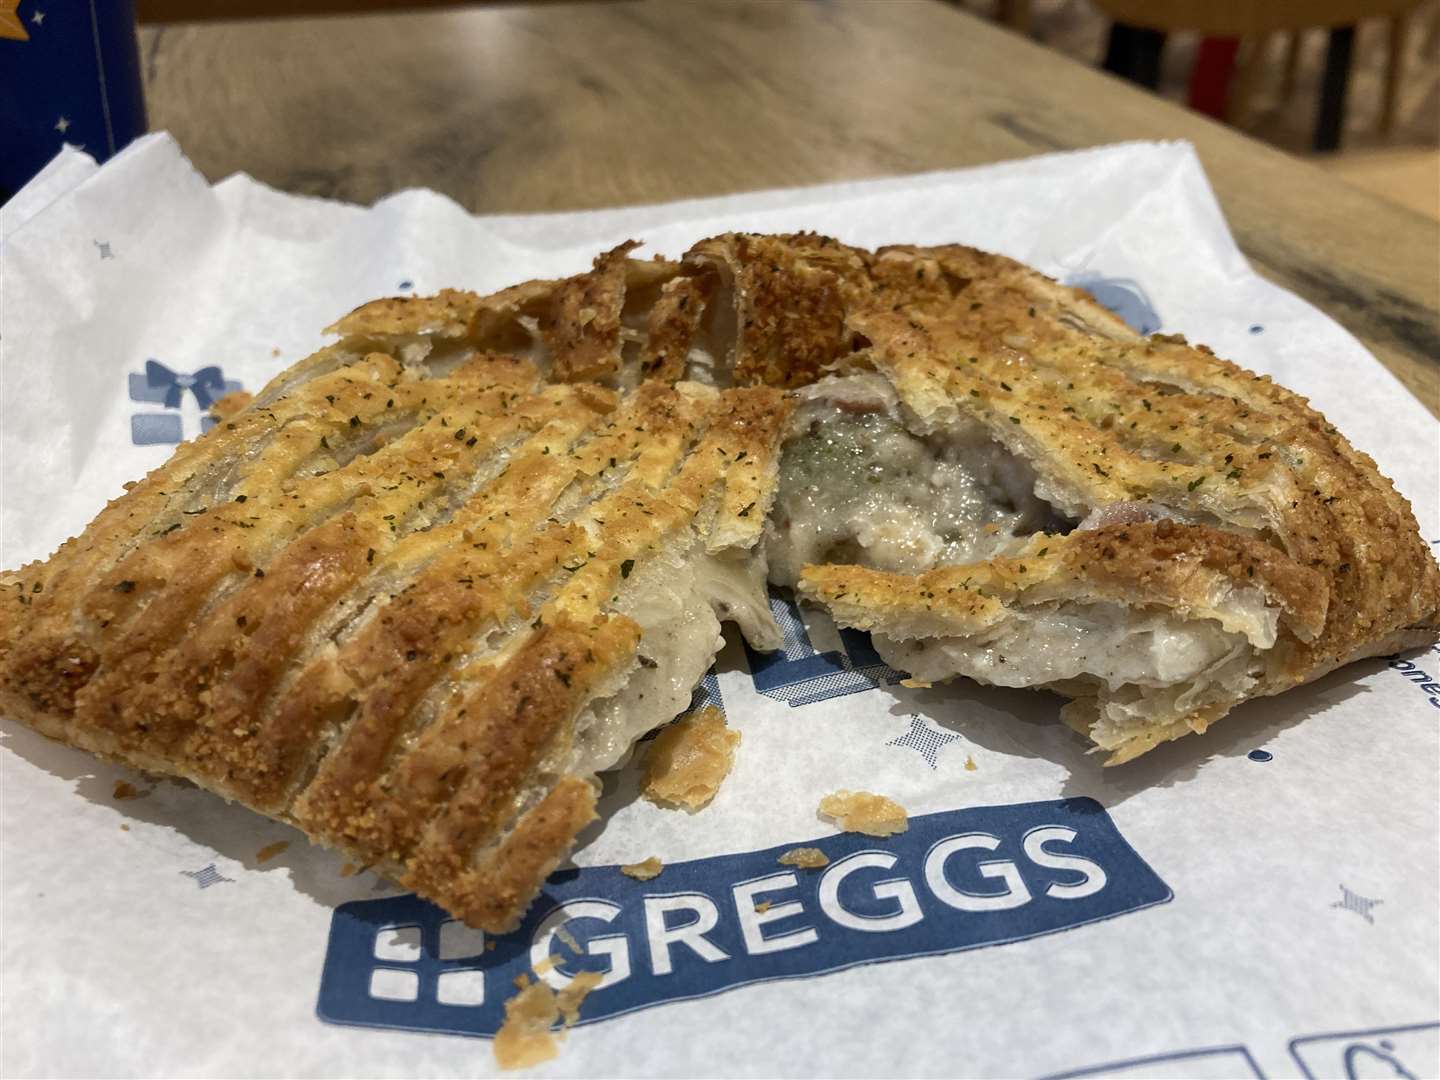 Hot food is increasingly popular with customers after 4pm says Greggs